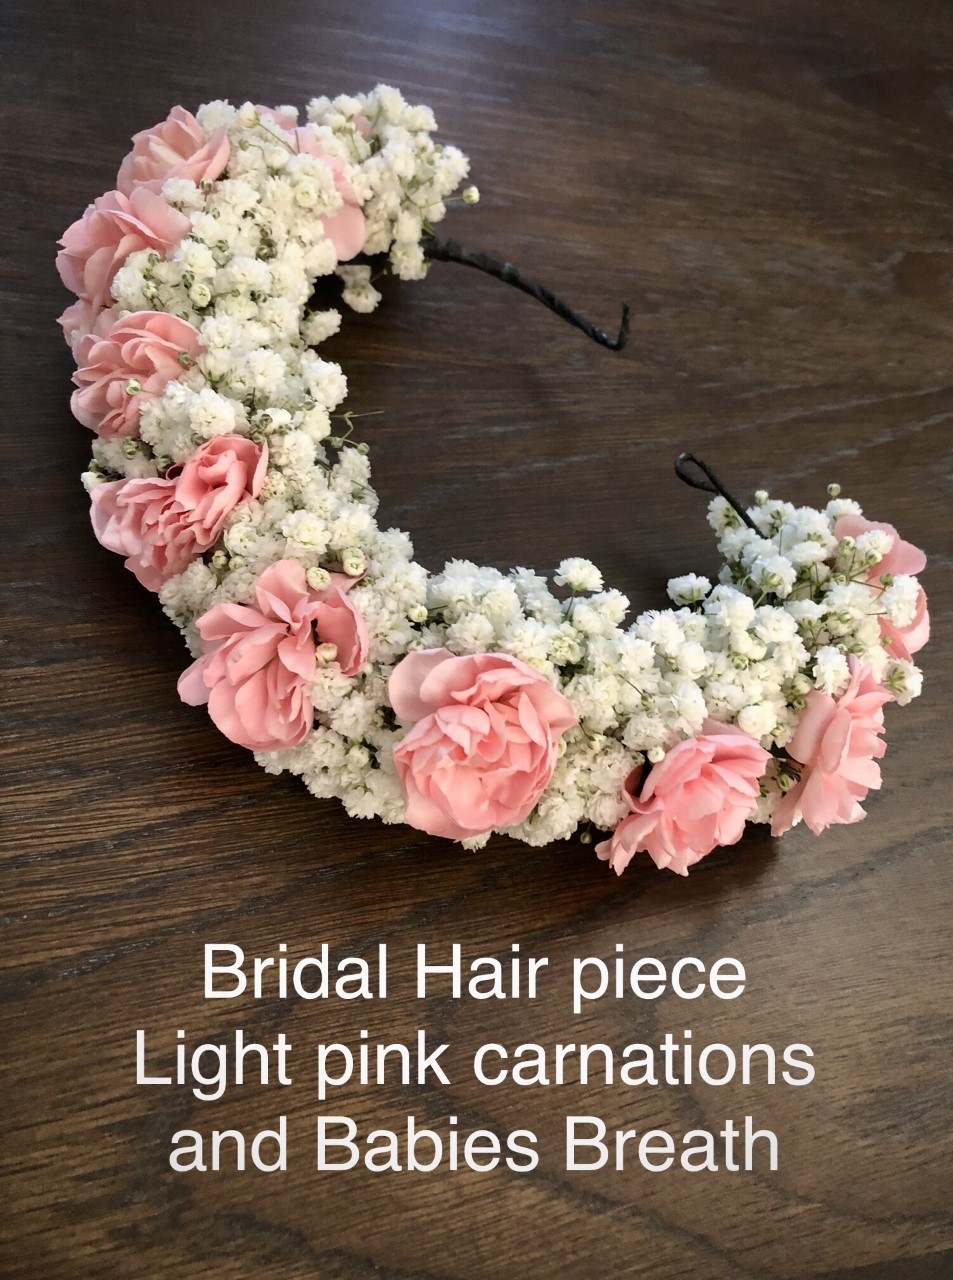 $50 Bridal Hair piece carnations and babies breath 